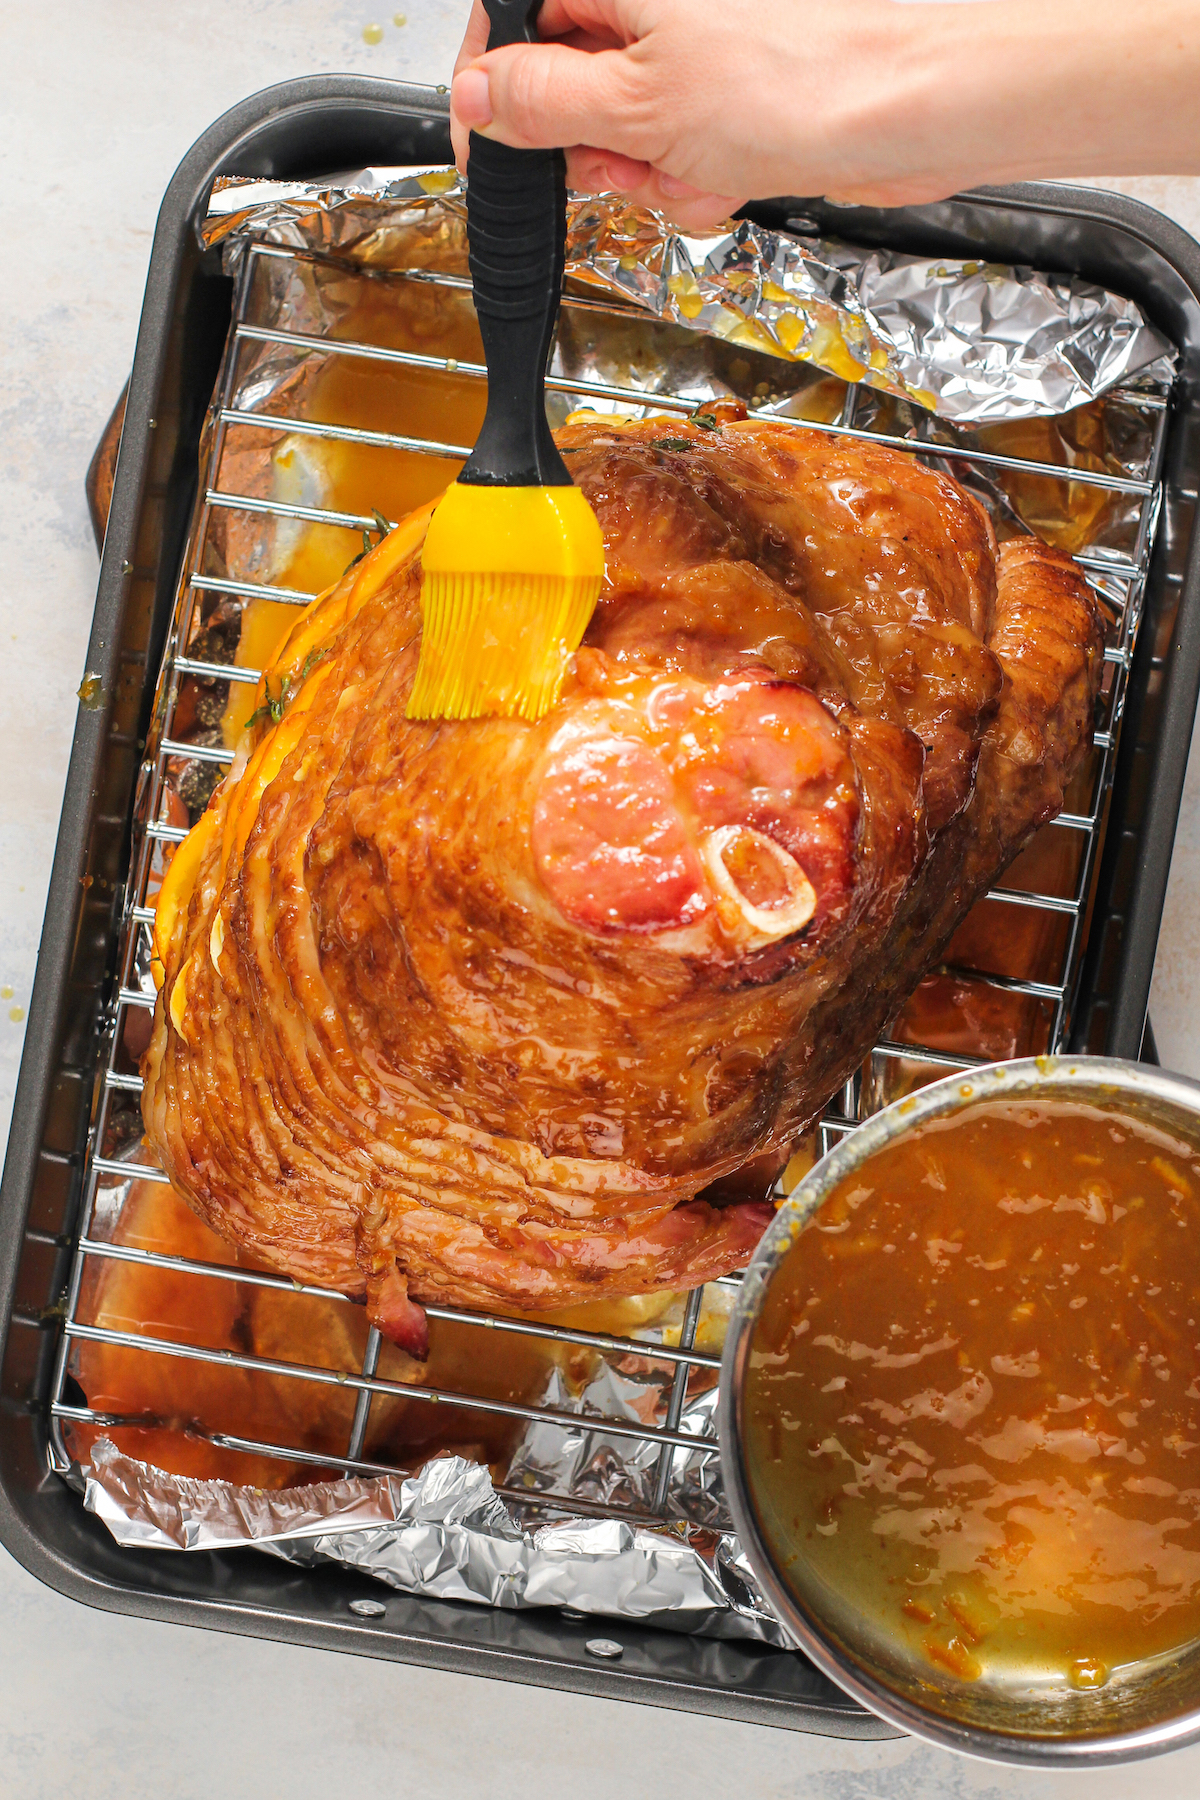 A spiral ham on a roasting rack, being brushed with glaze.